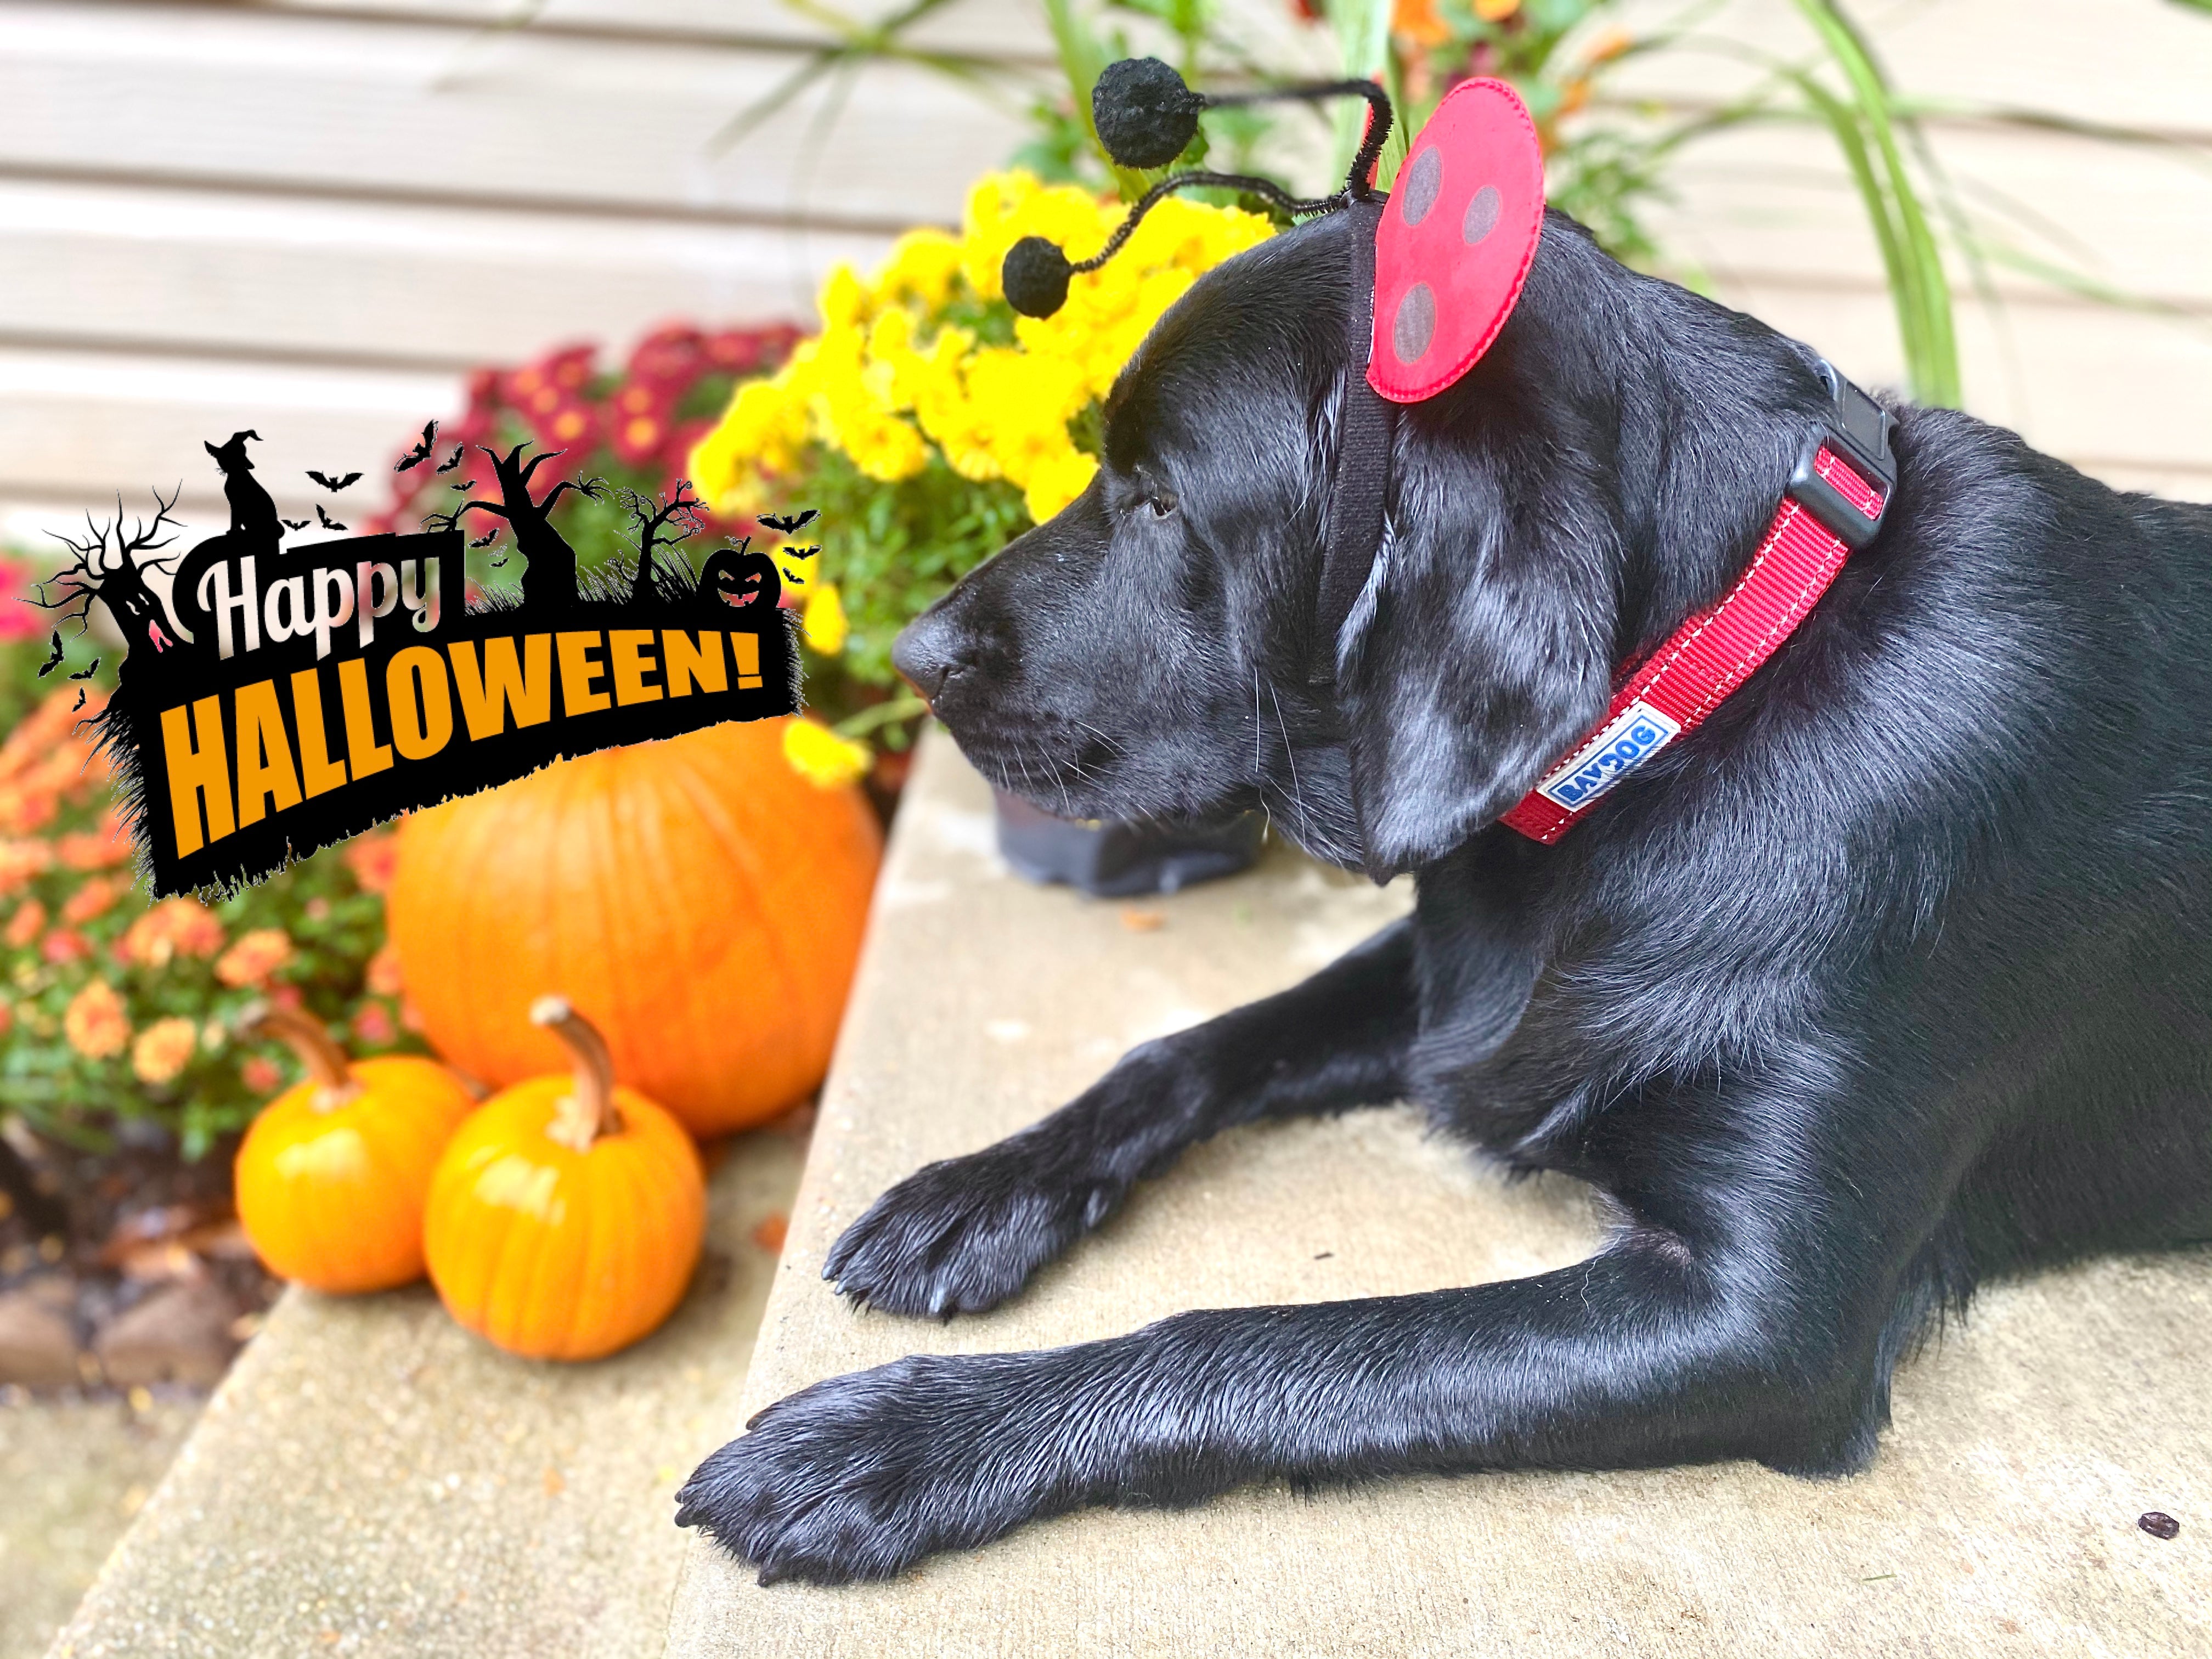 Halloween Safety Tips for your Dog